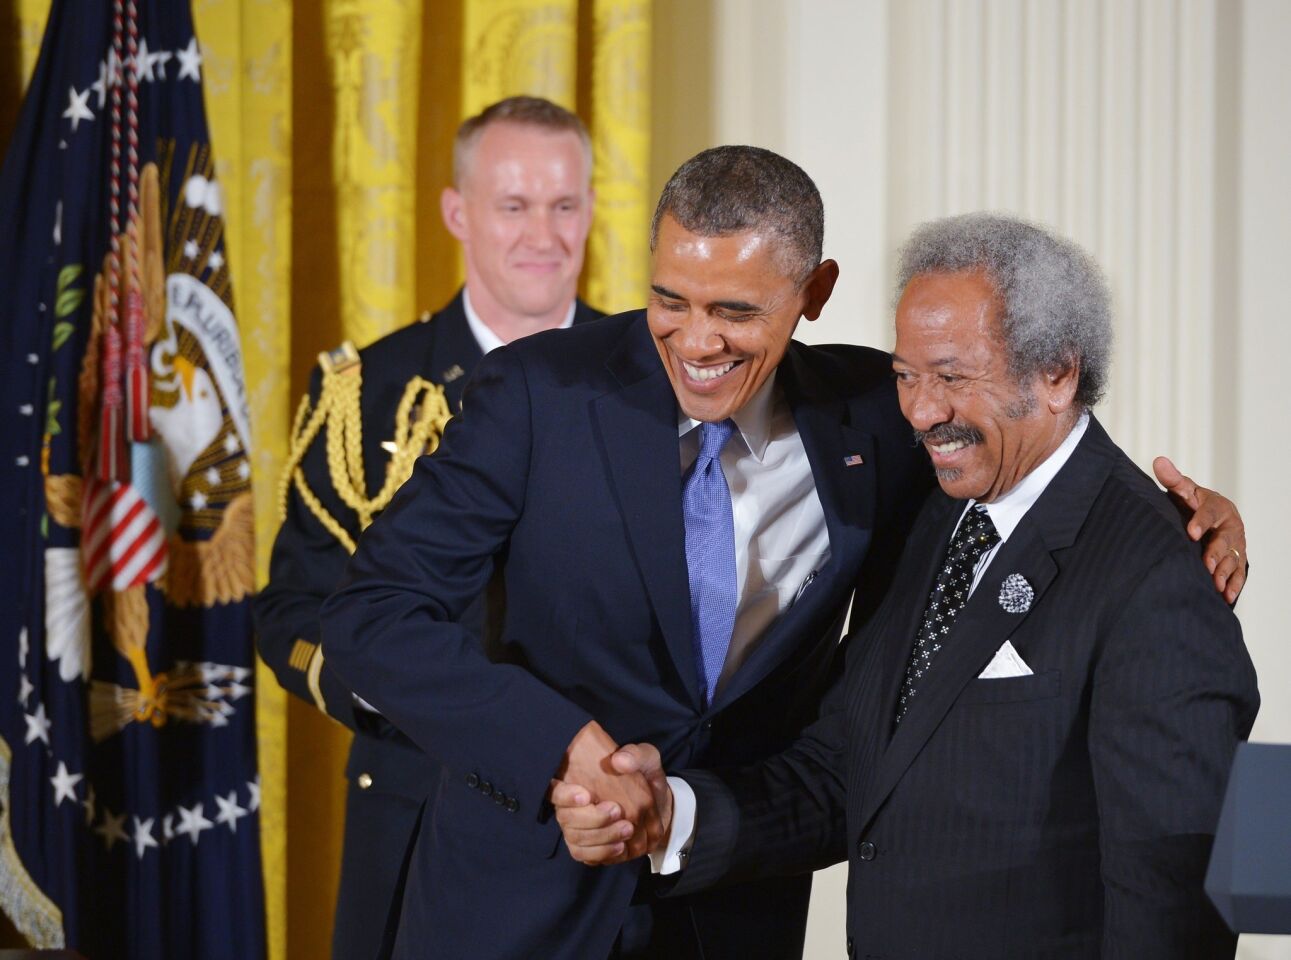 President Obama greets Allen Toussaint in the East Room of the White House in July 2013 during a ceremony to award the 2012 National Medal of Arts.